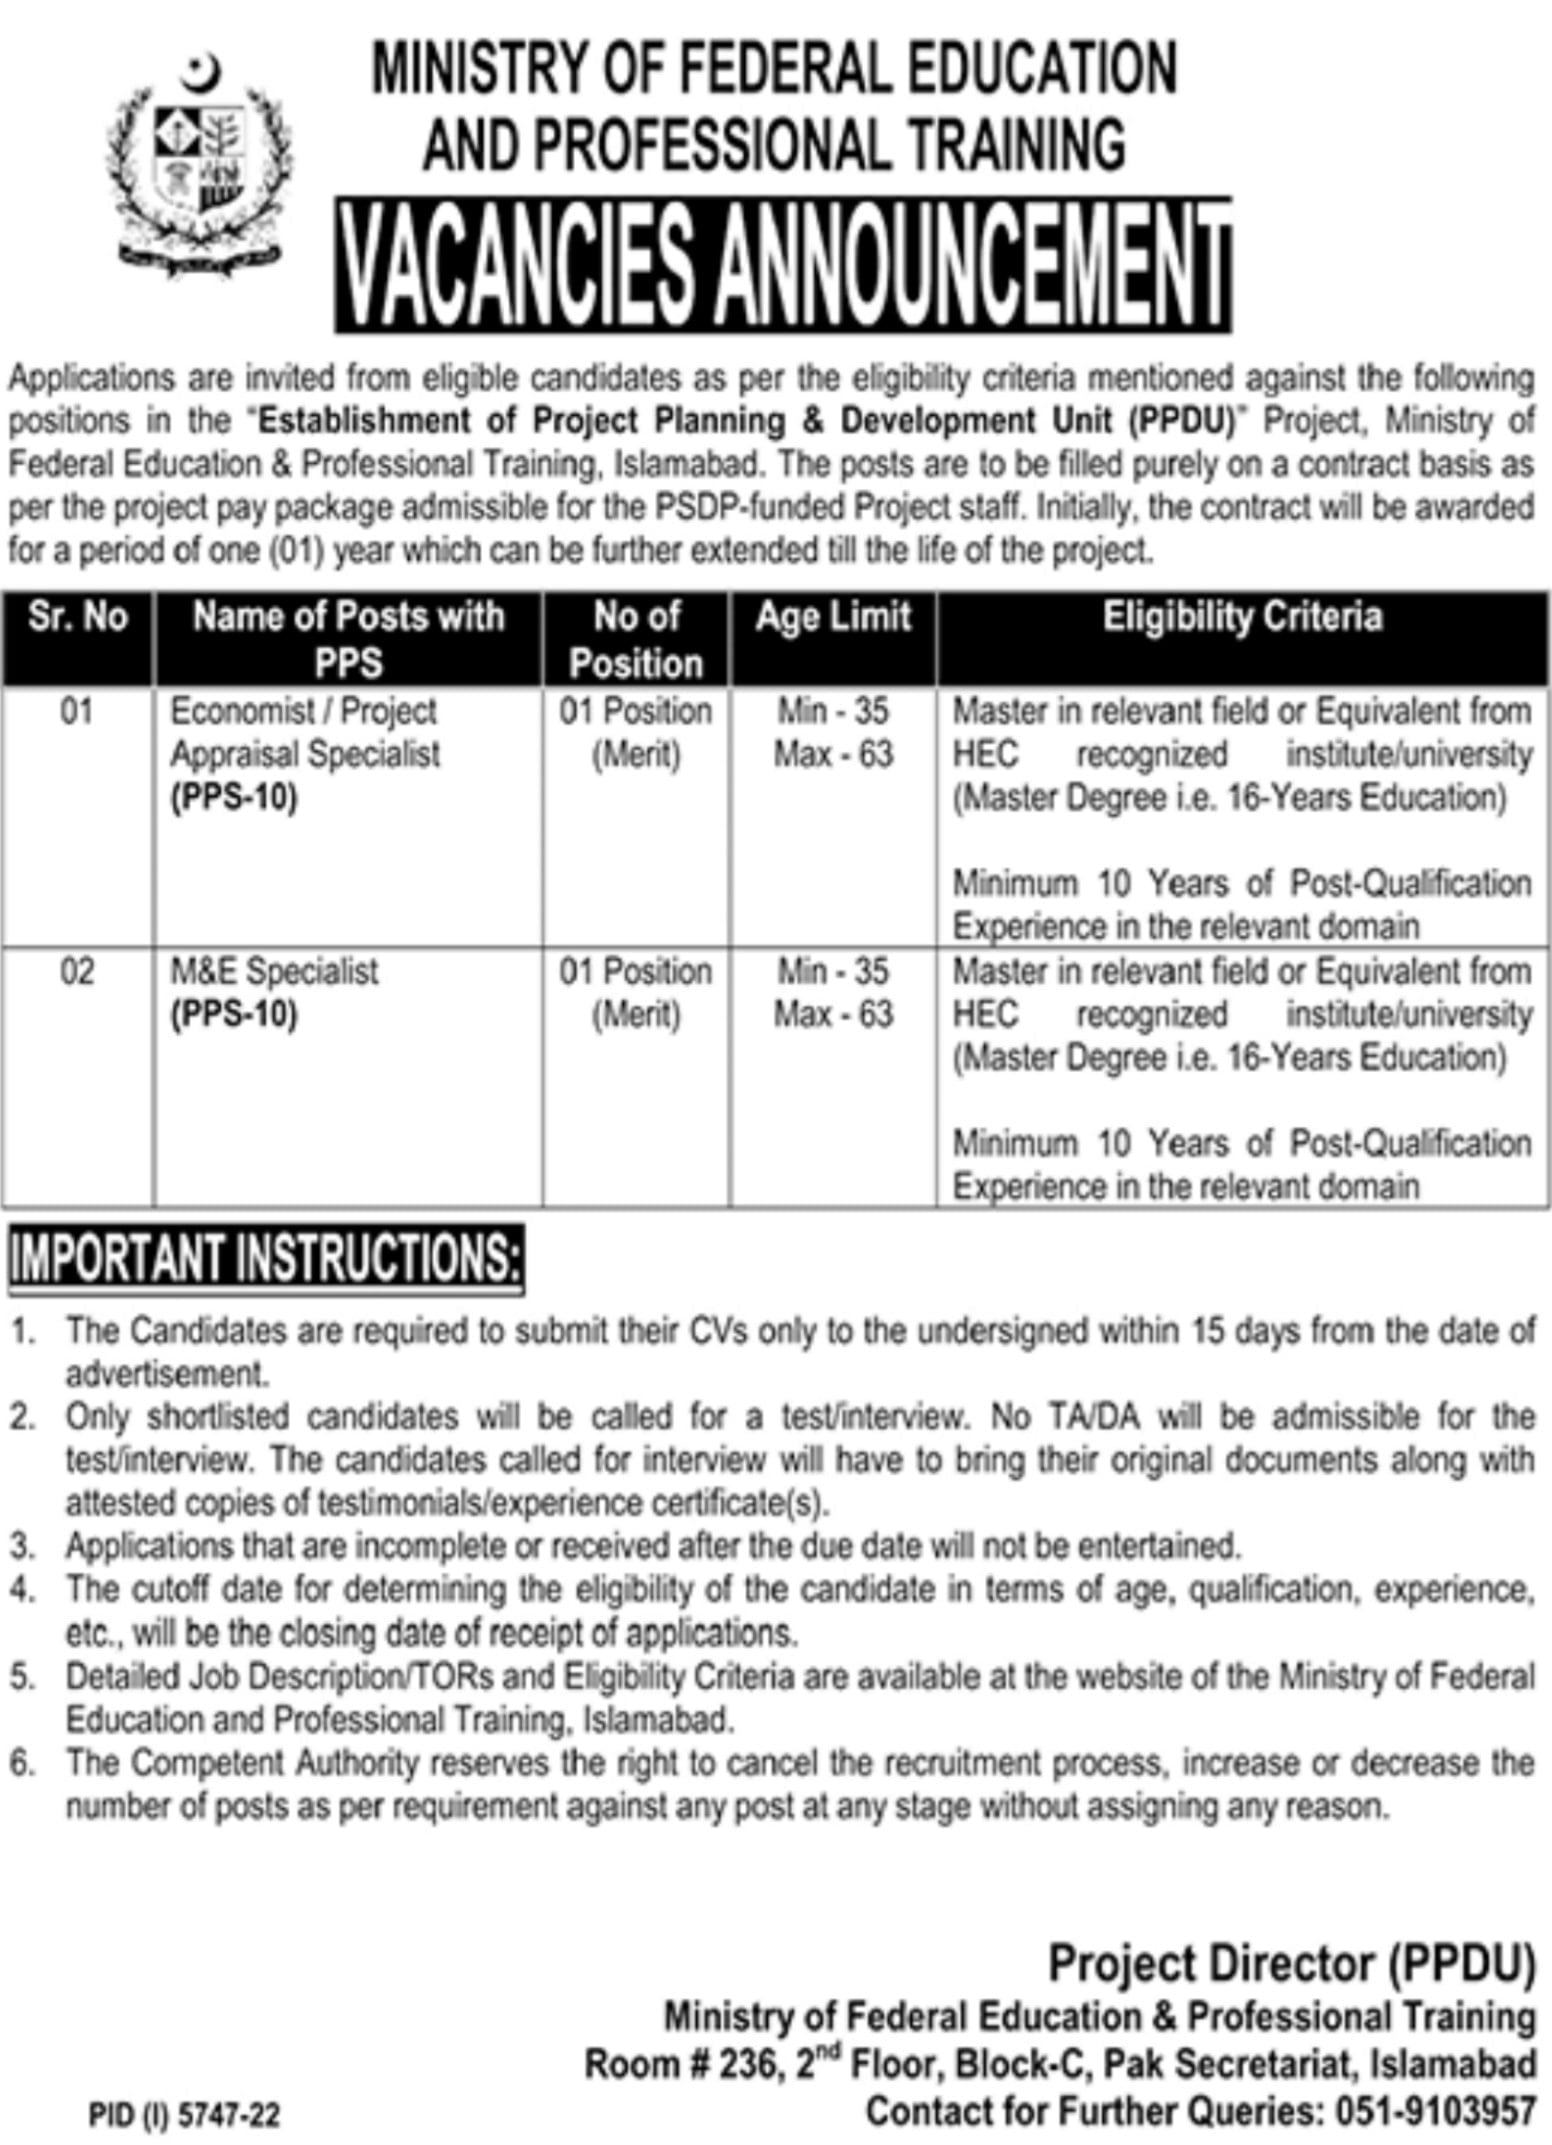 Latest jobs in Ministry of Federal Education and Professional Training 2023